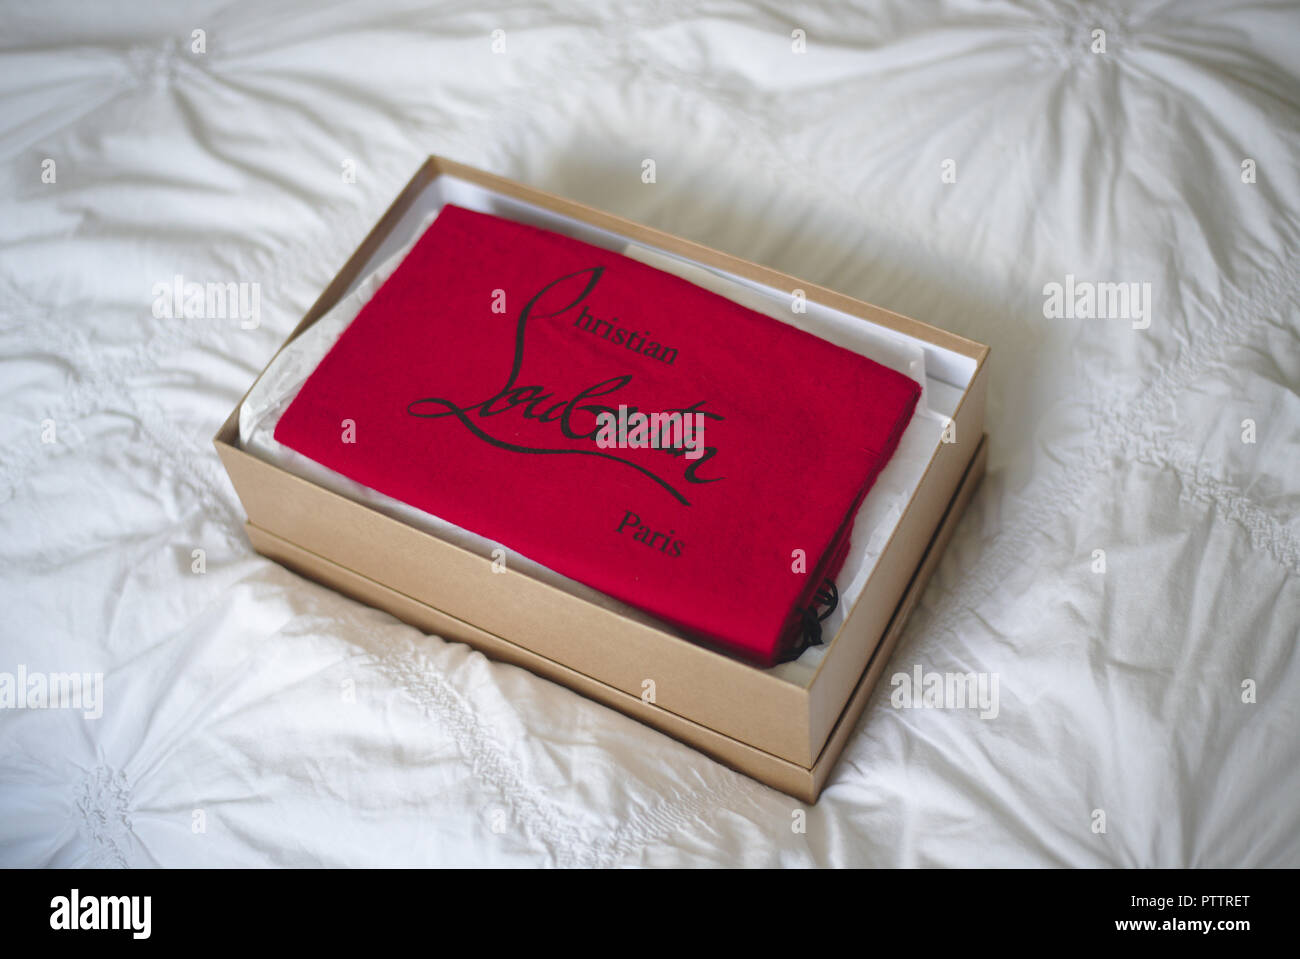 Christian Louboutin Shoes in a box on a white duvet Stock Photo